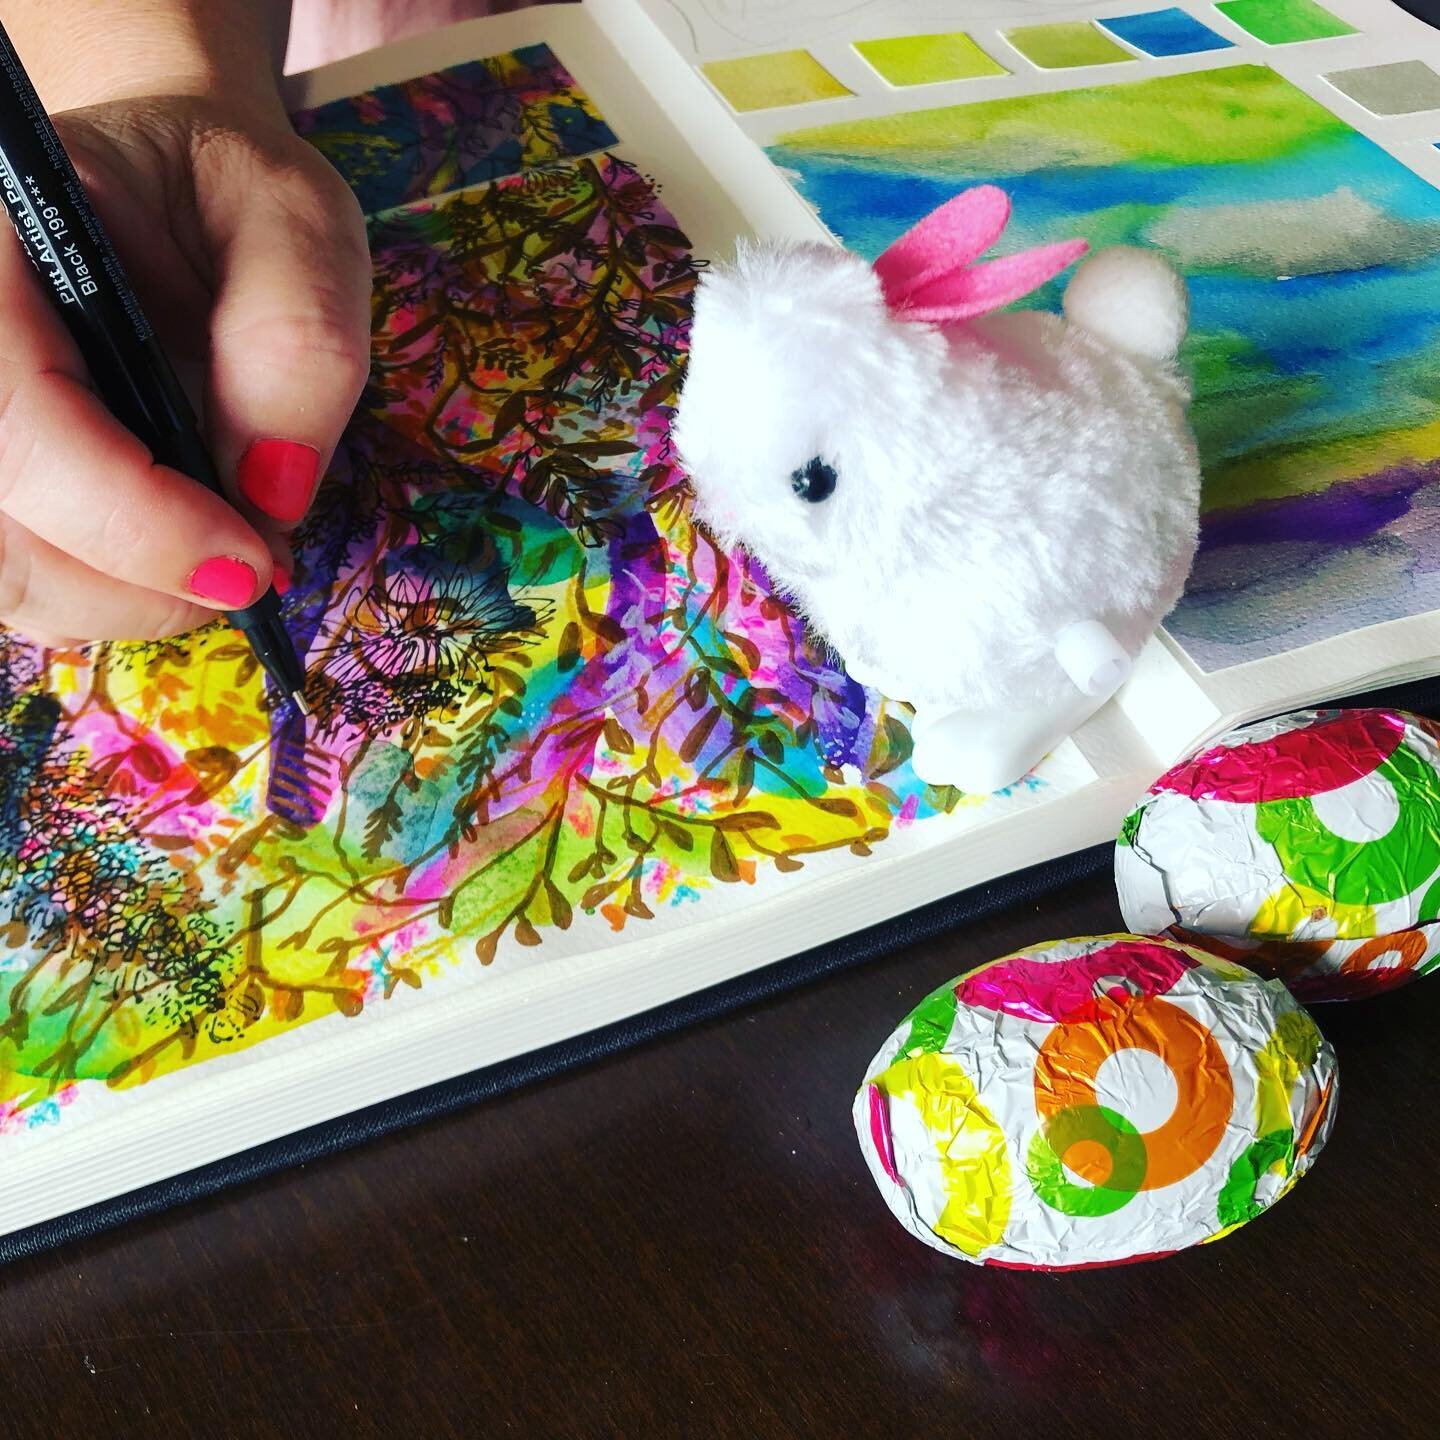 Thank you to my sister for taking this pic&hellip;a very busy and full Easter weekend was had 🐰🐣 hope you all had a lovely time with those you love 💜
#easter #eastereggs #family #familytime #dailyart #artjournal #rcarty #rcartydesigns